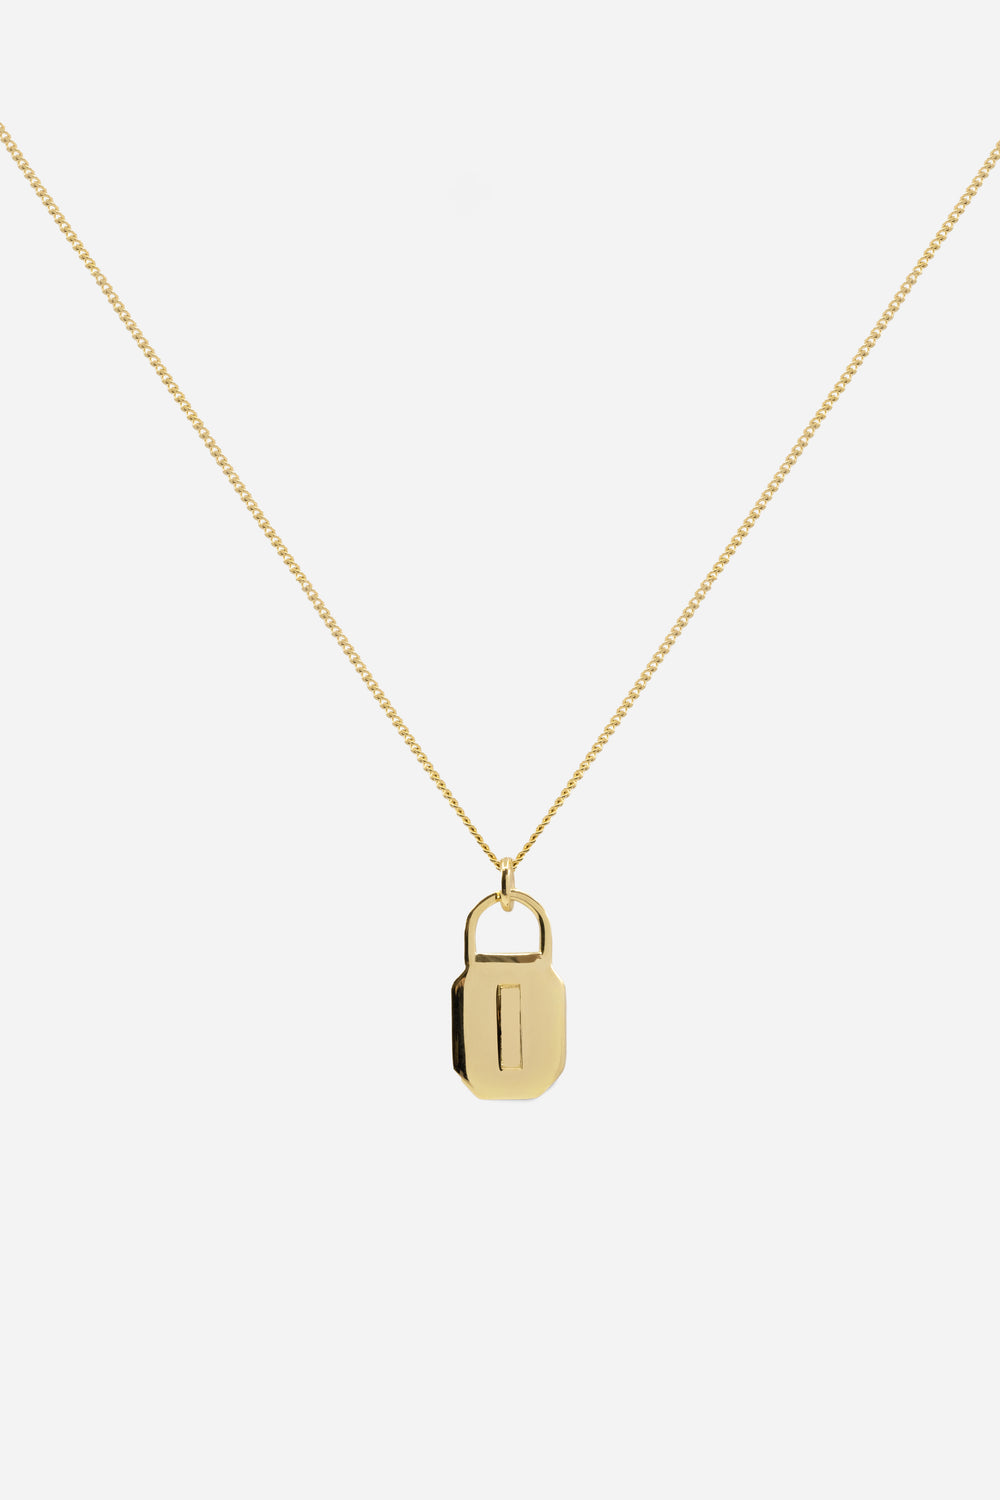 Octagon Lock Necklace | 9K Yellow Gold